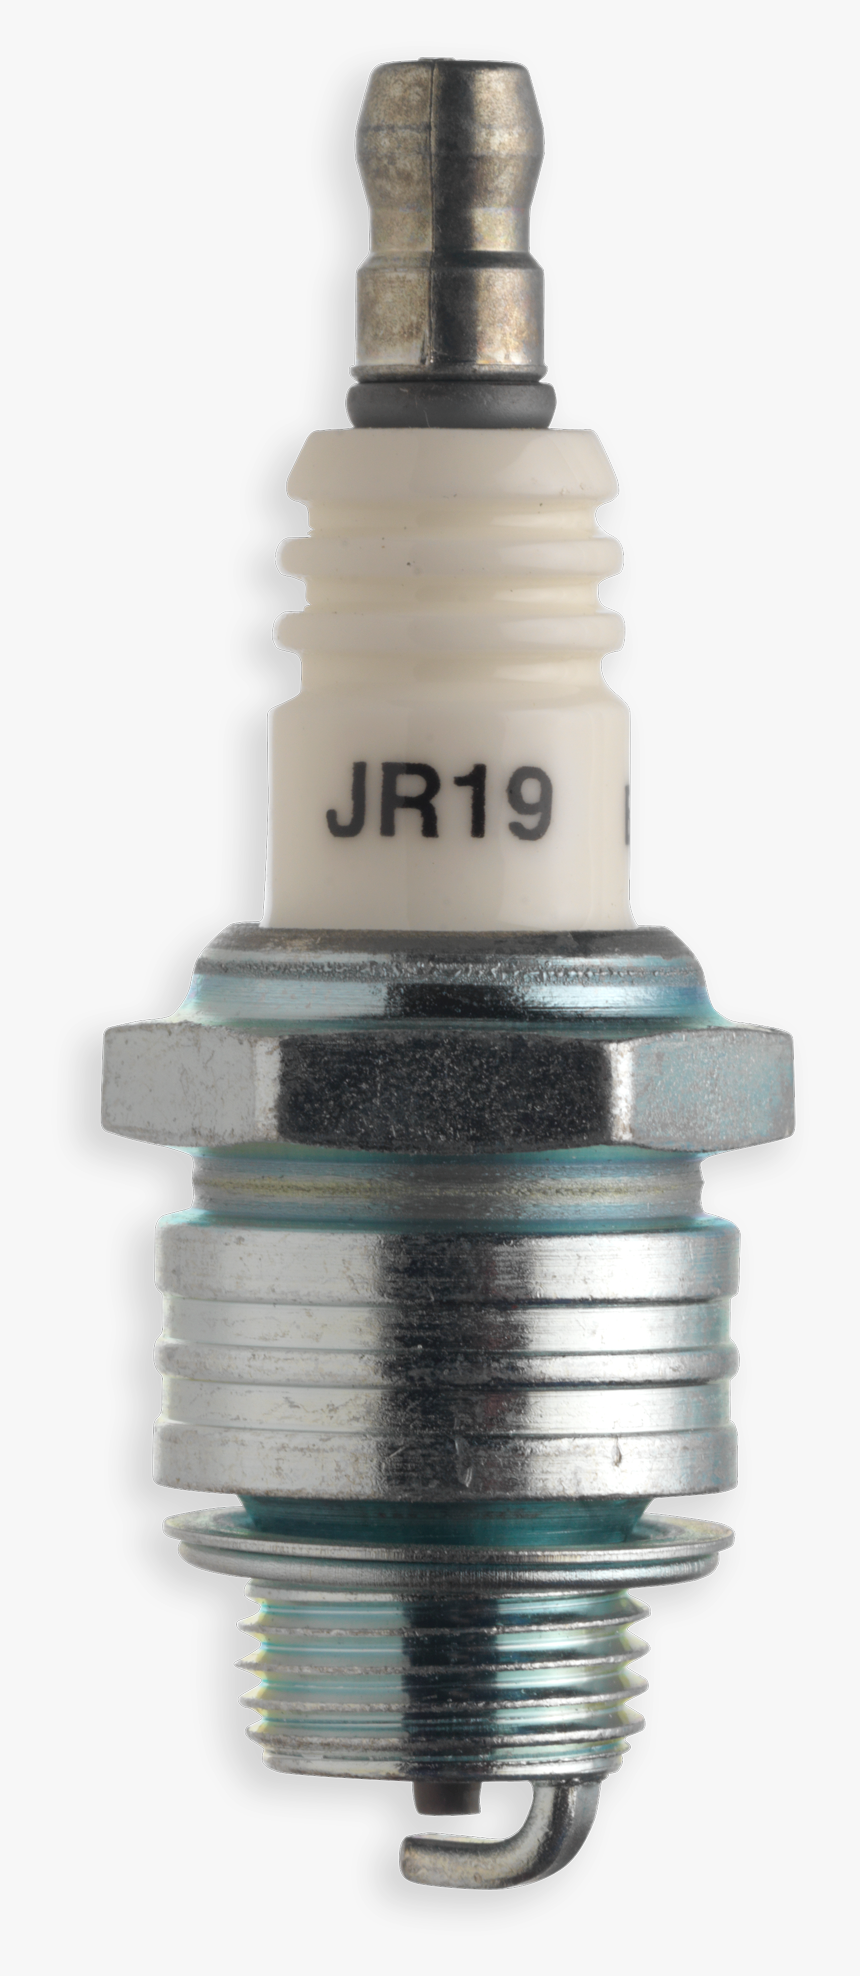 Upm Spark Plug - Mcculloch Cabrio 433l Spark, HD Png Download, Free Download